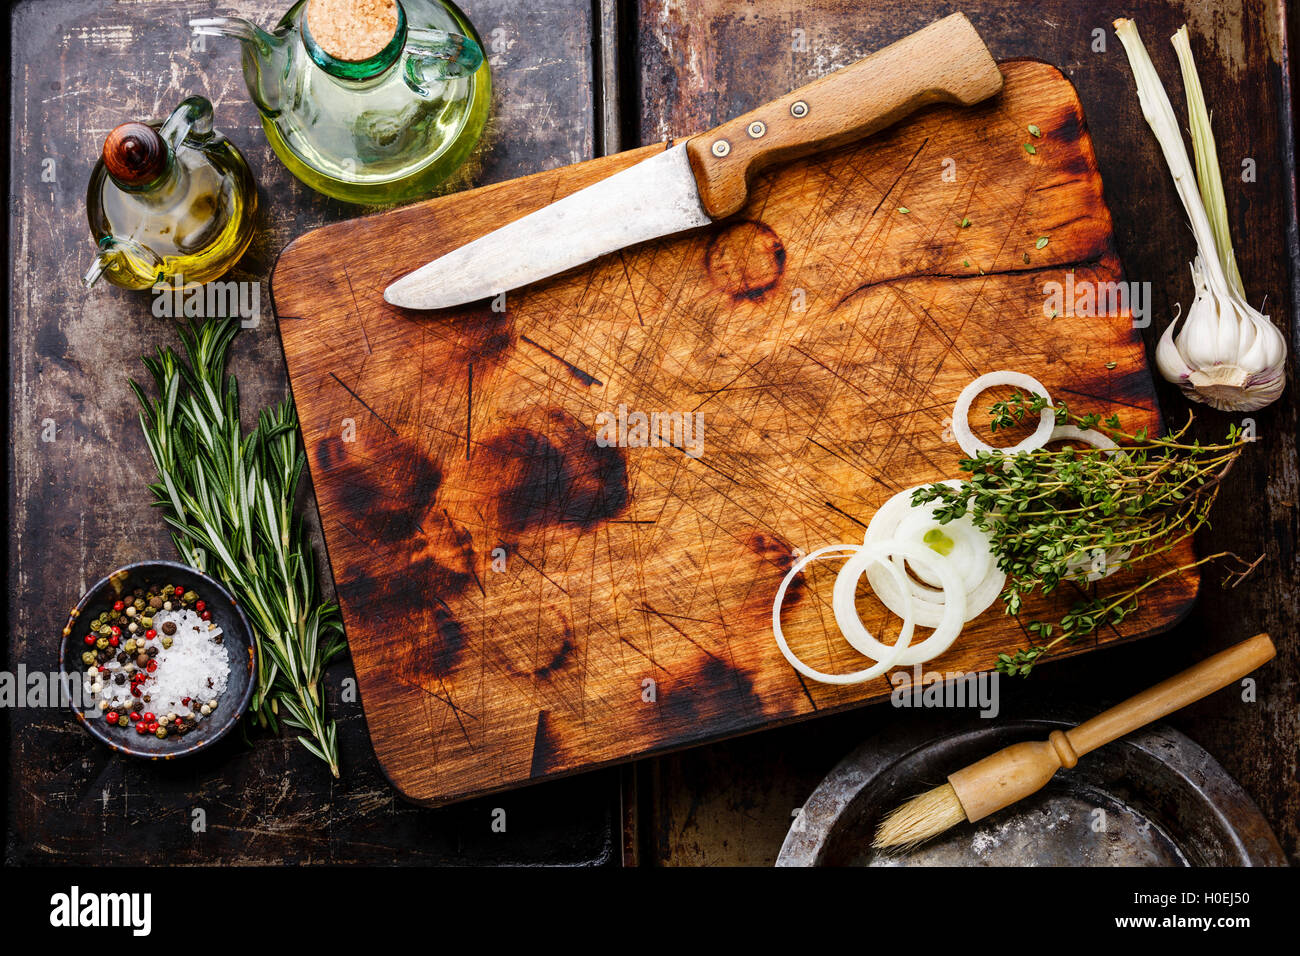 Wooden chopping board background with Seasoning and herbs Stock Photo